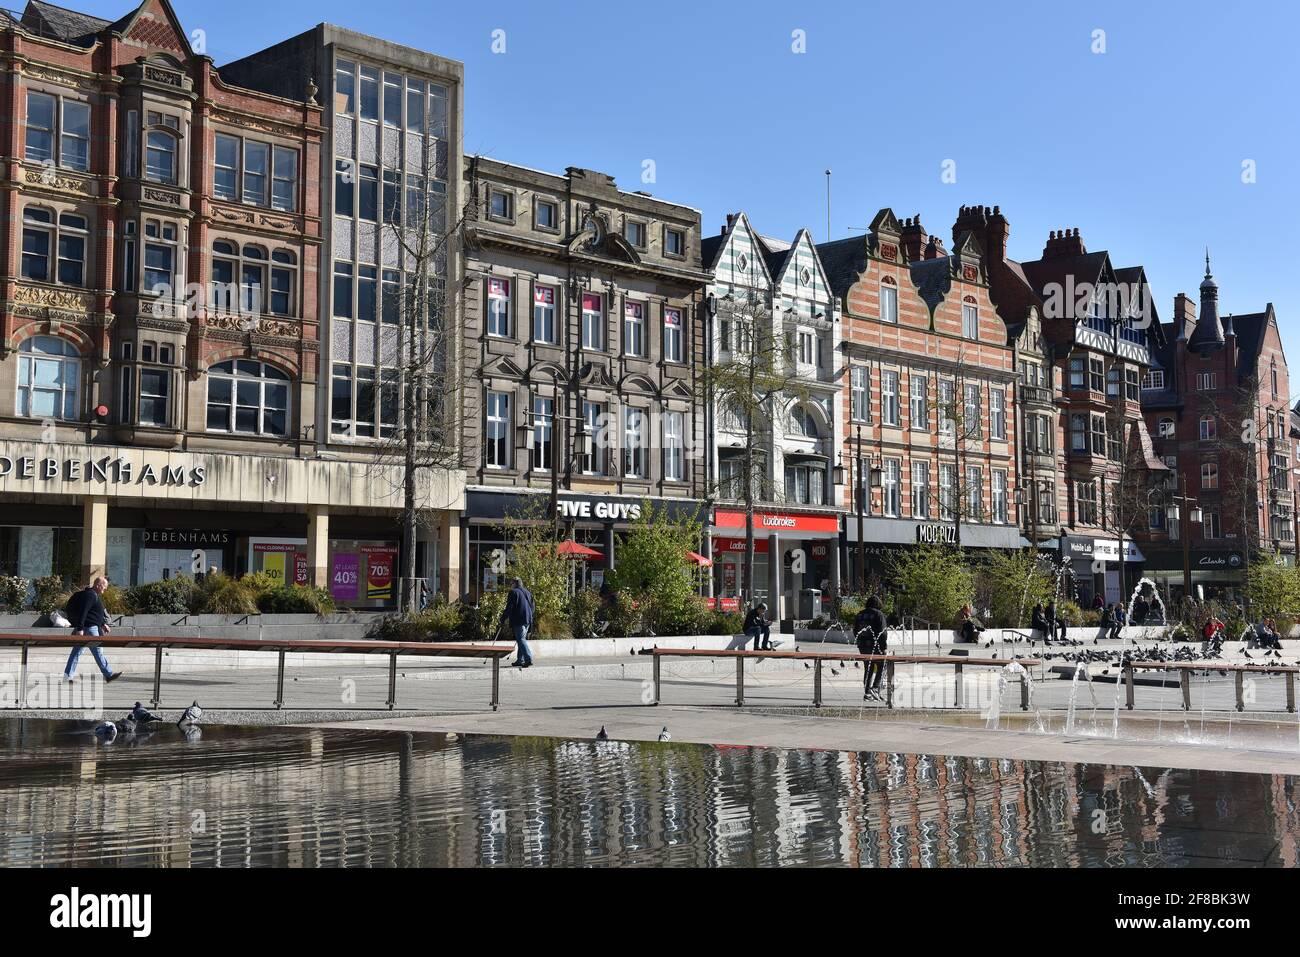 View of Traditional architecture and historical of the Shops in the old Market Square in Nottingham city centre, England Stock Photo